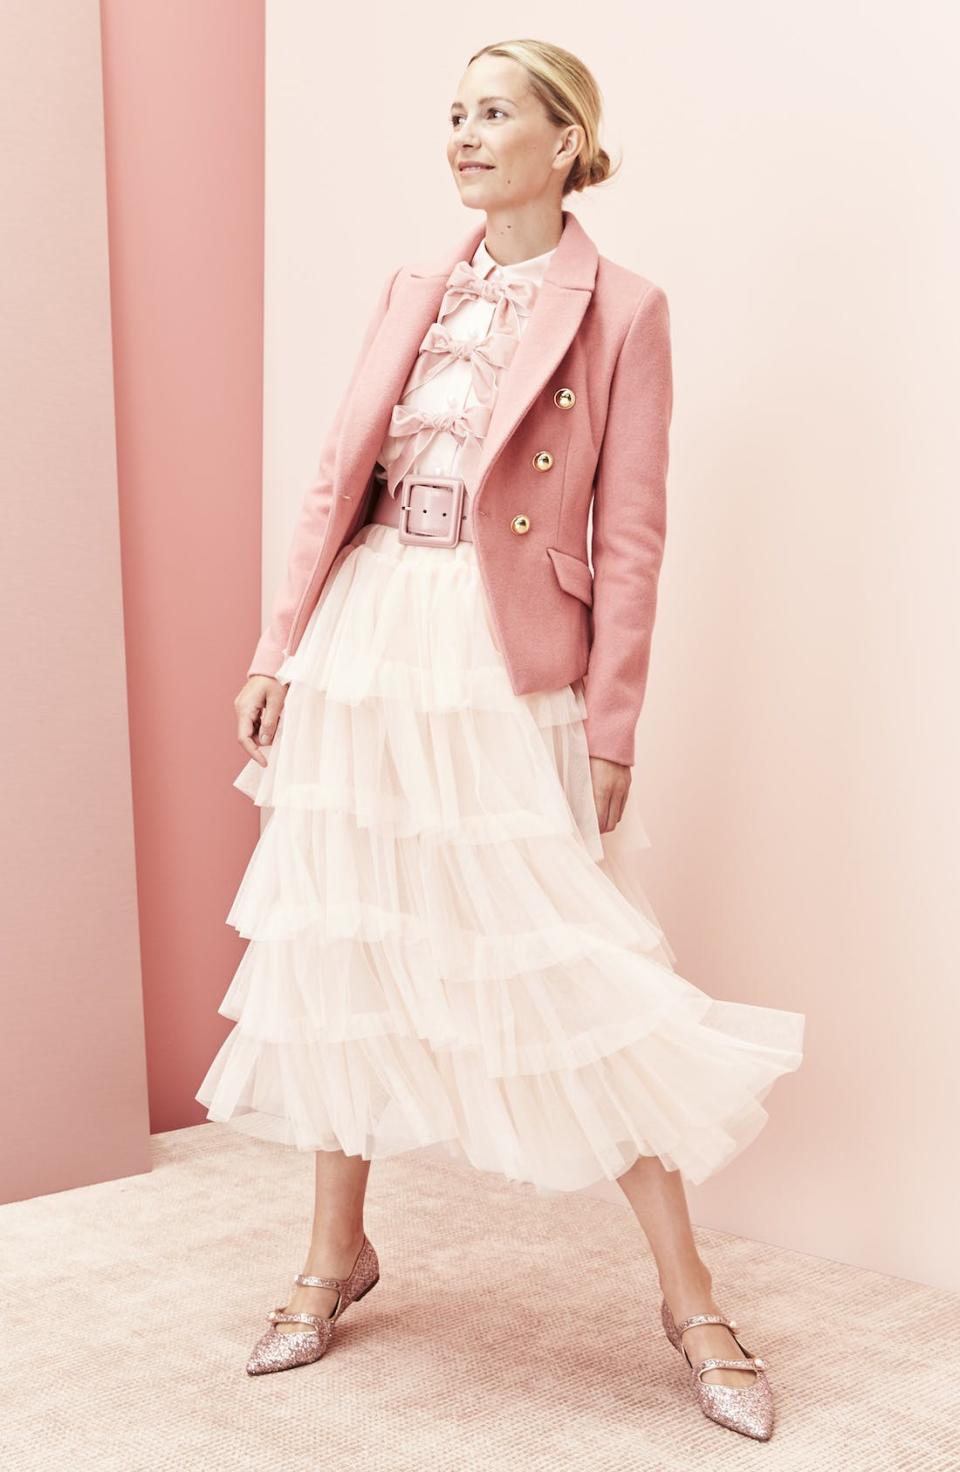 Blaire Edie in pink blazer and tulle skirt from Halogen x Atlantic-Pacific